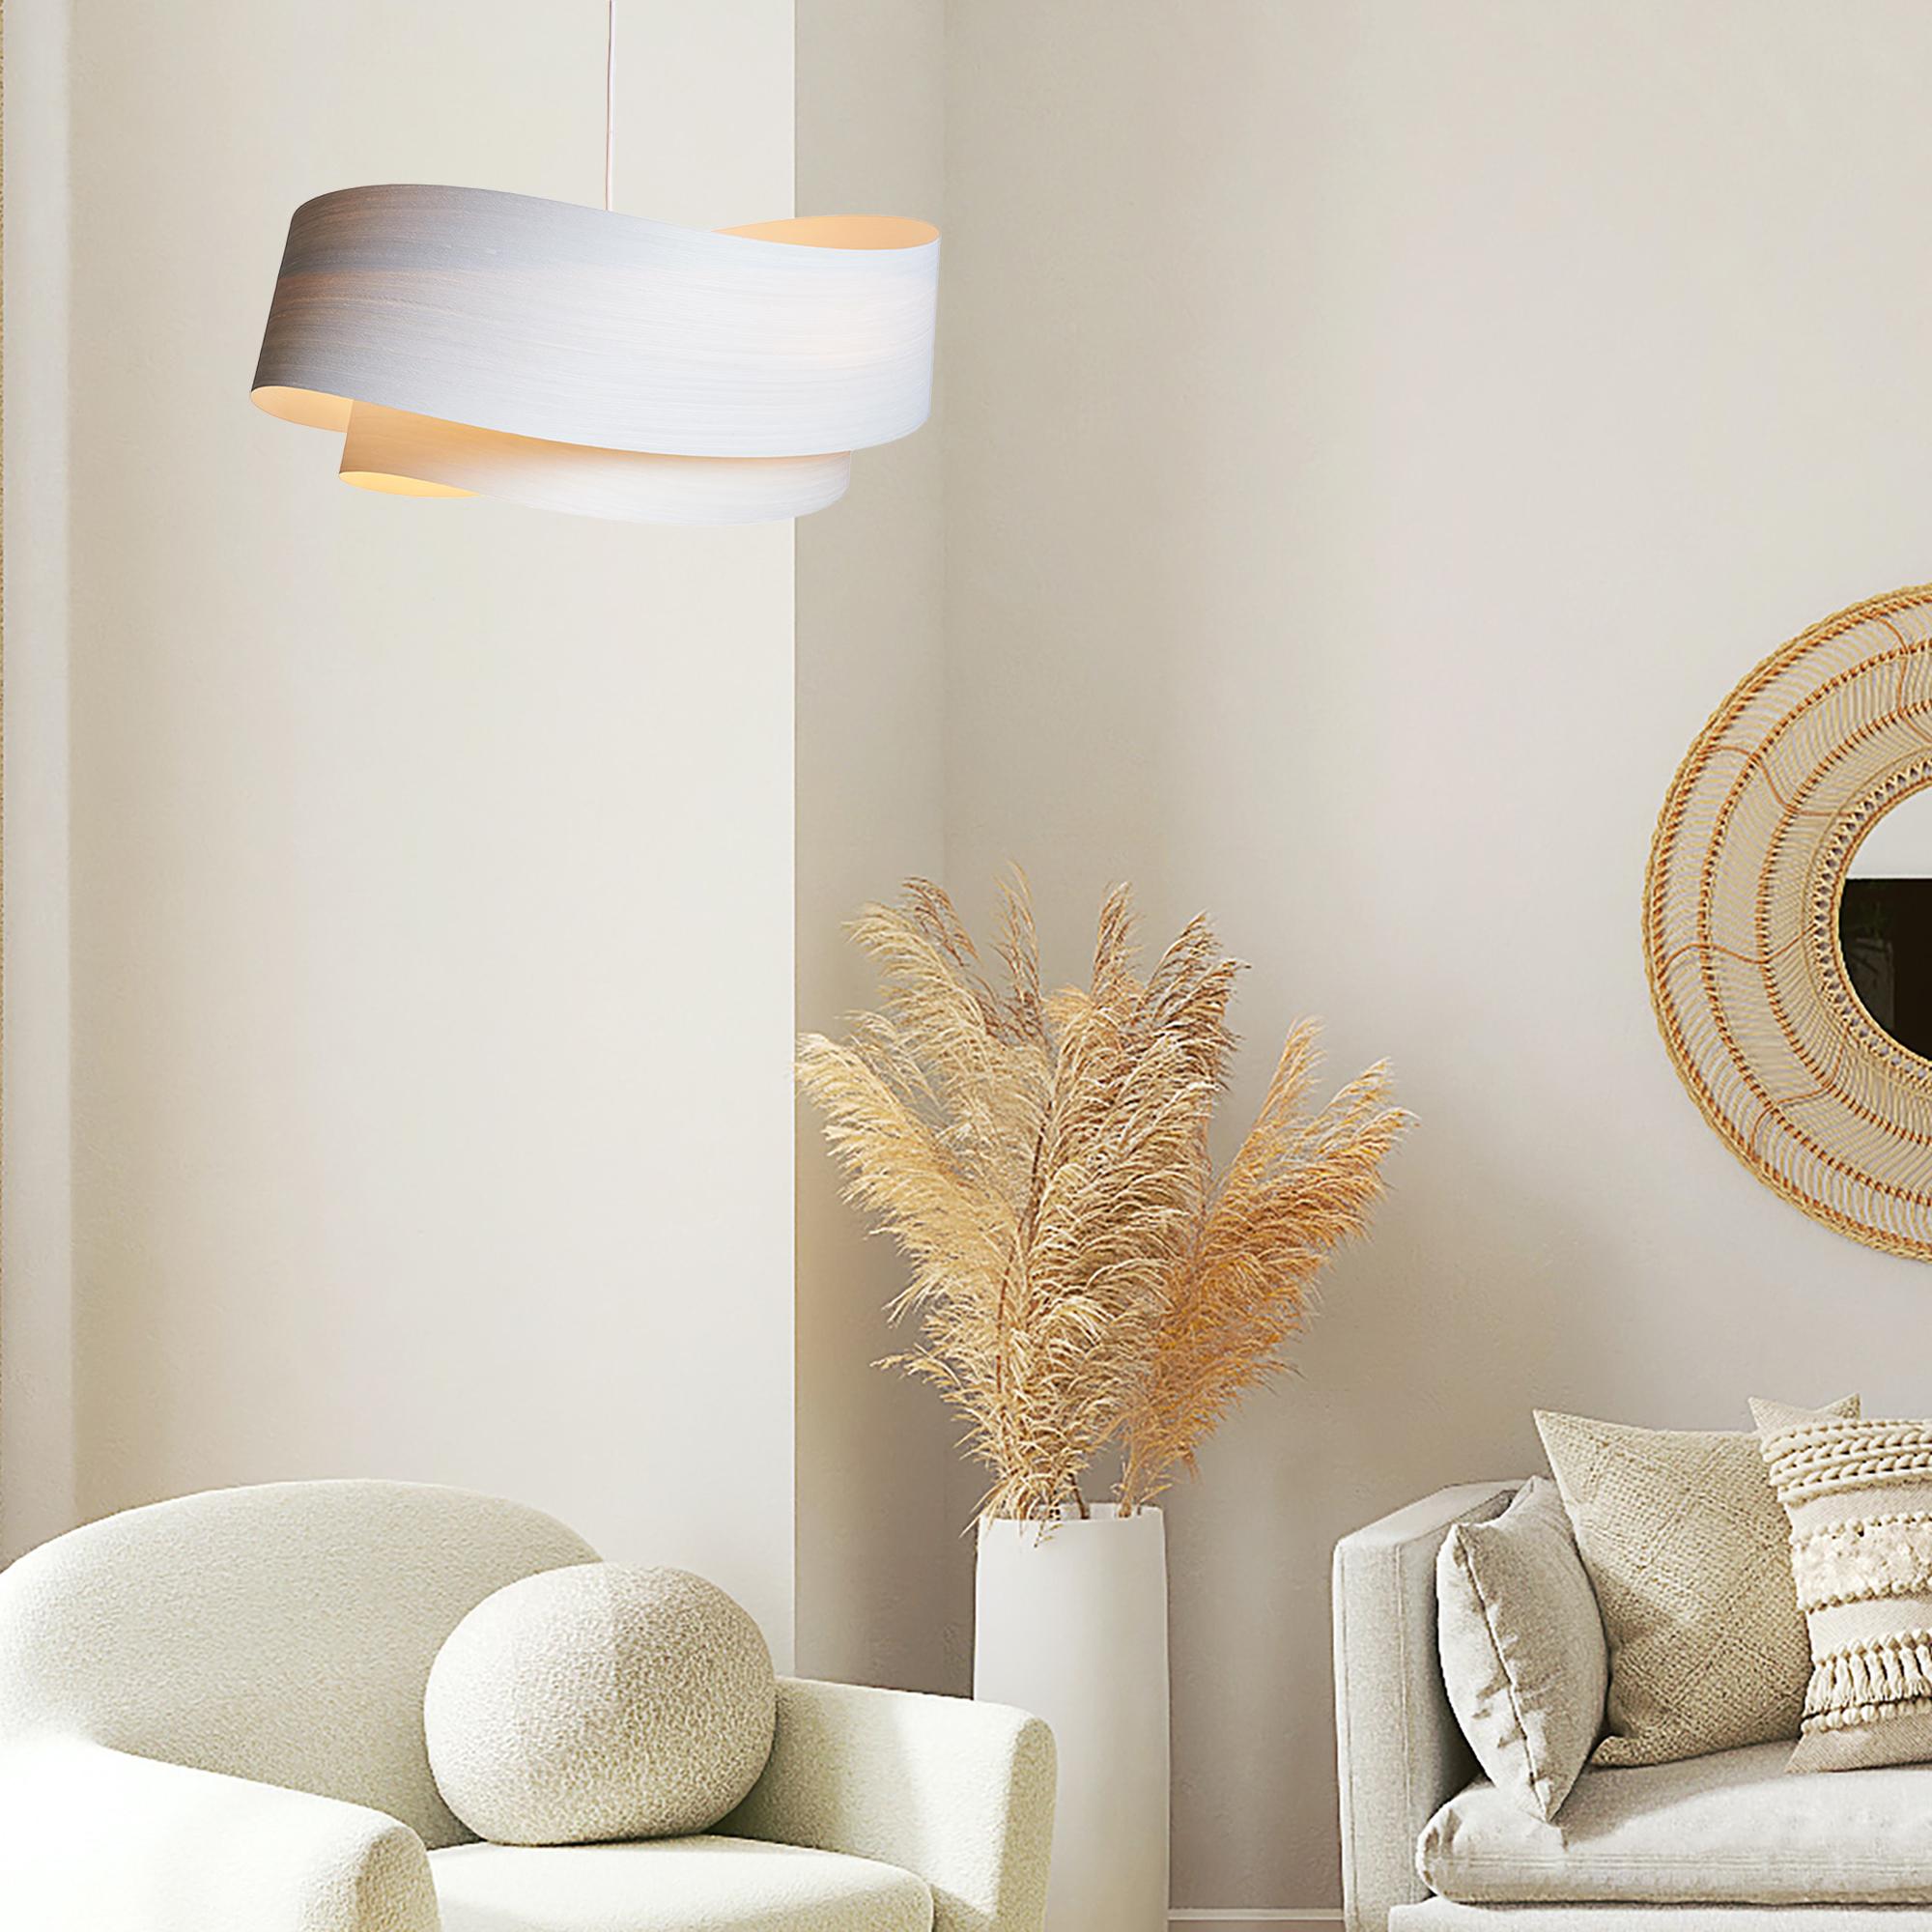 This stunning White ECO wood veneer pendant light is the perfect way to add a touch of nature and elegance to your home. Handcrafted from the finest White ECO wood veneer, each light is a unique work of art.

White ECO wood veneer is a premium